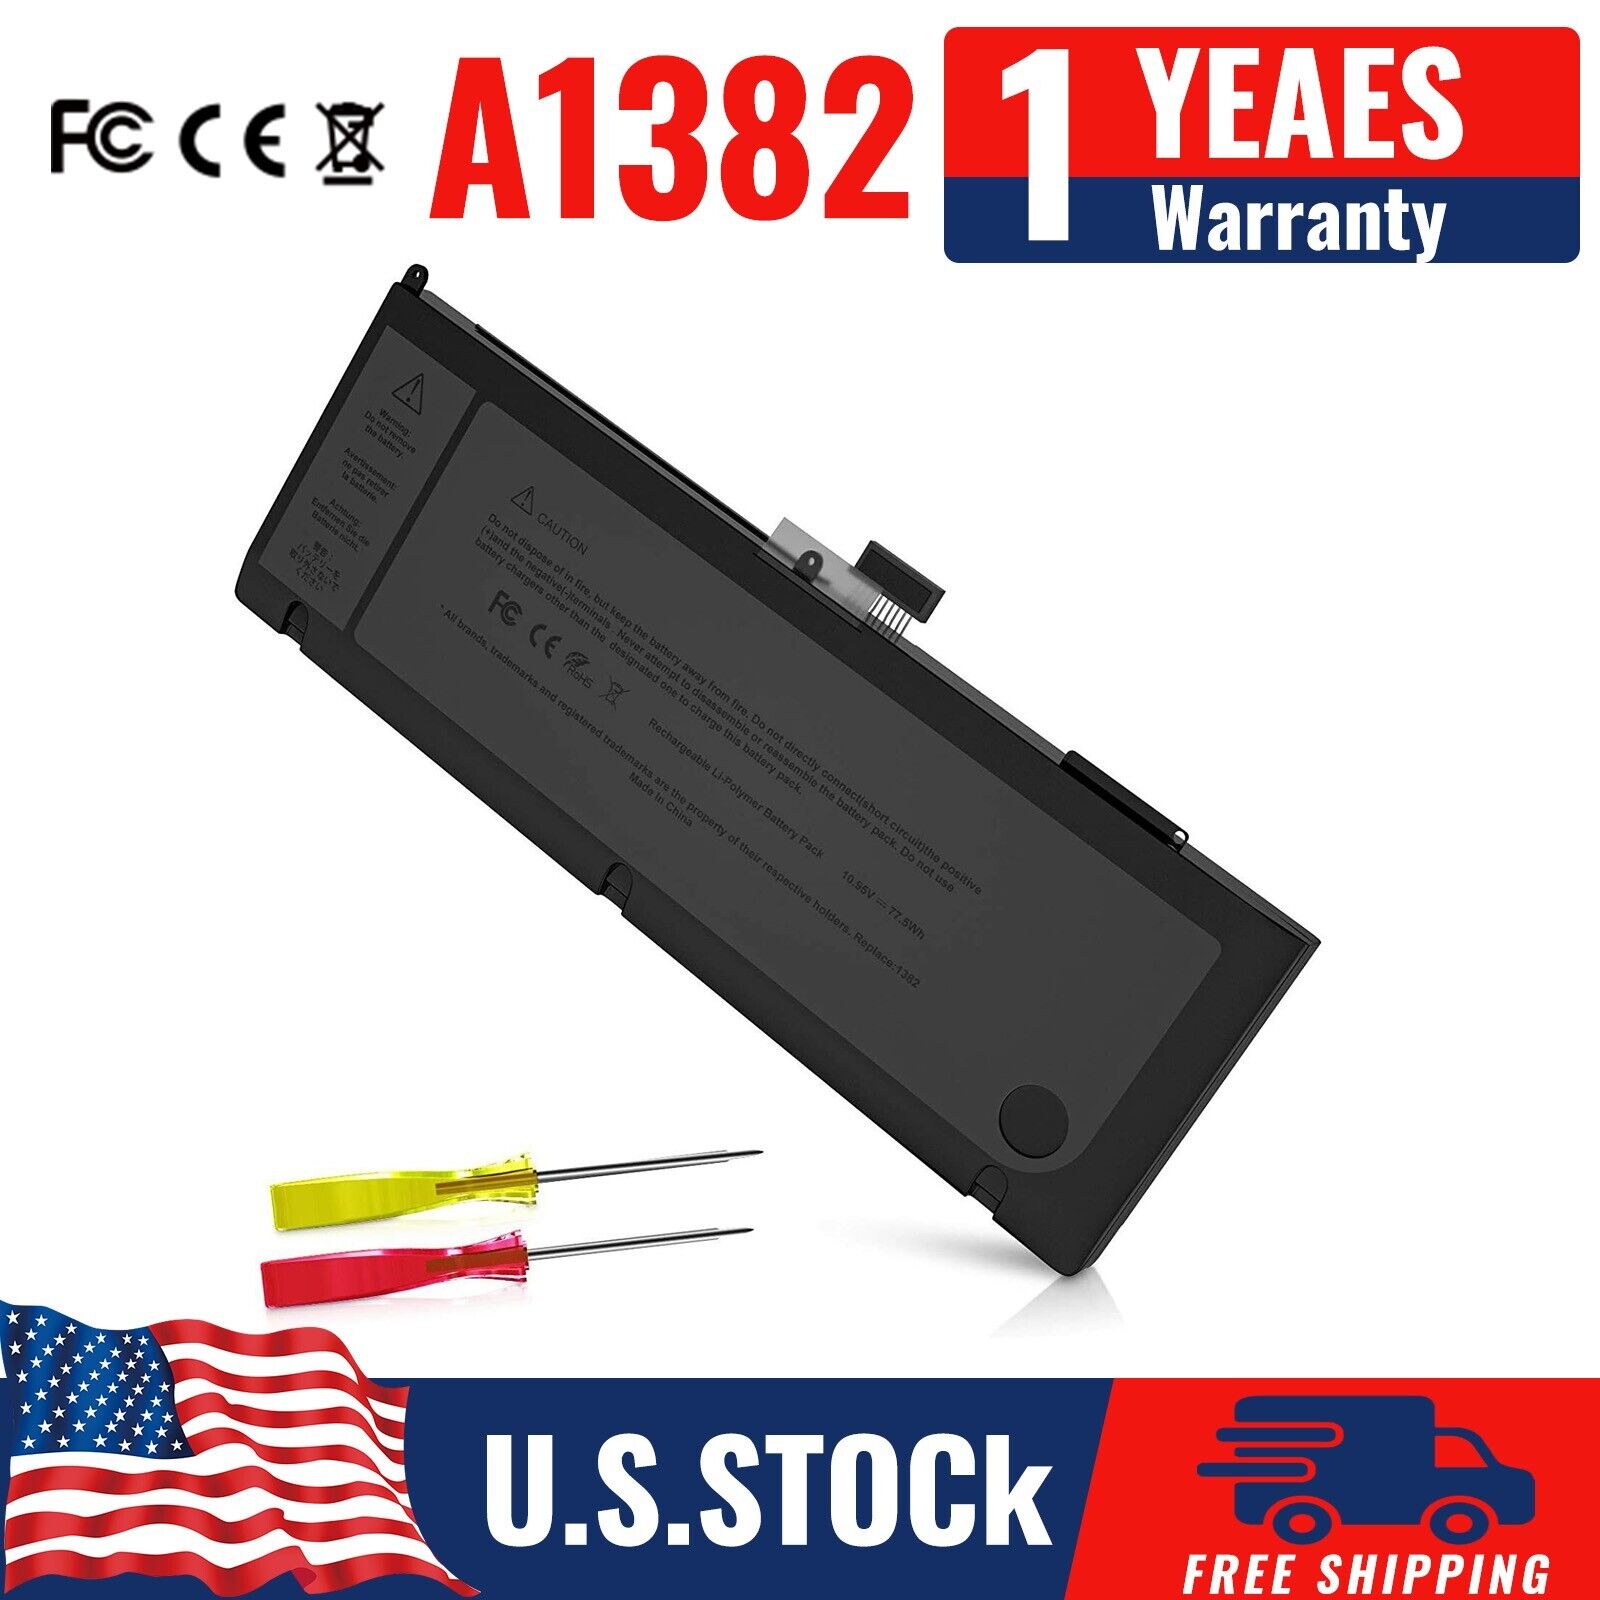 Genuine OEM A1382 Battery for MacBook Pro 15 inch A1286 Early/Late 2011 Mid 2012